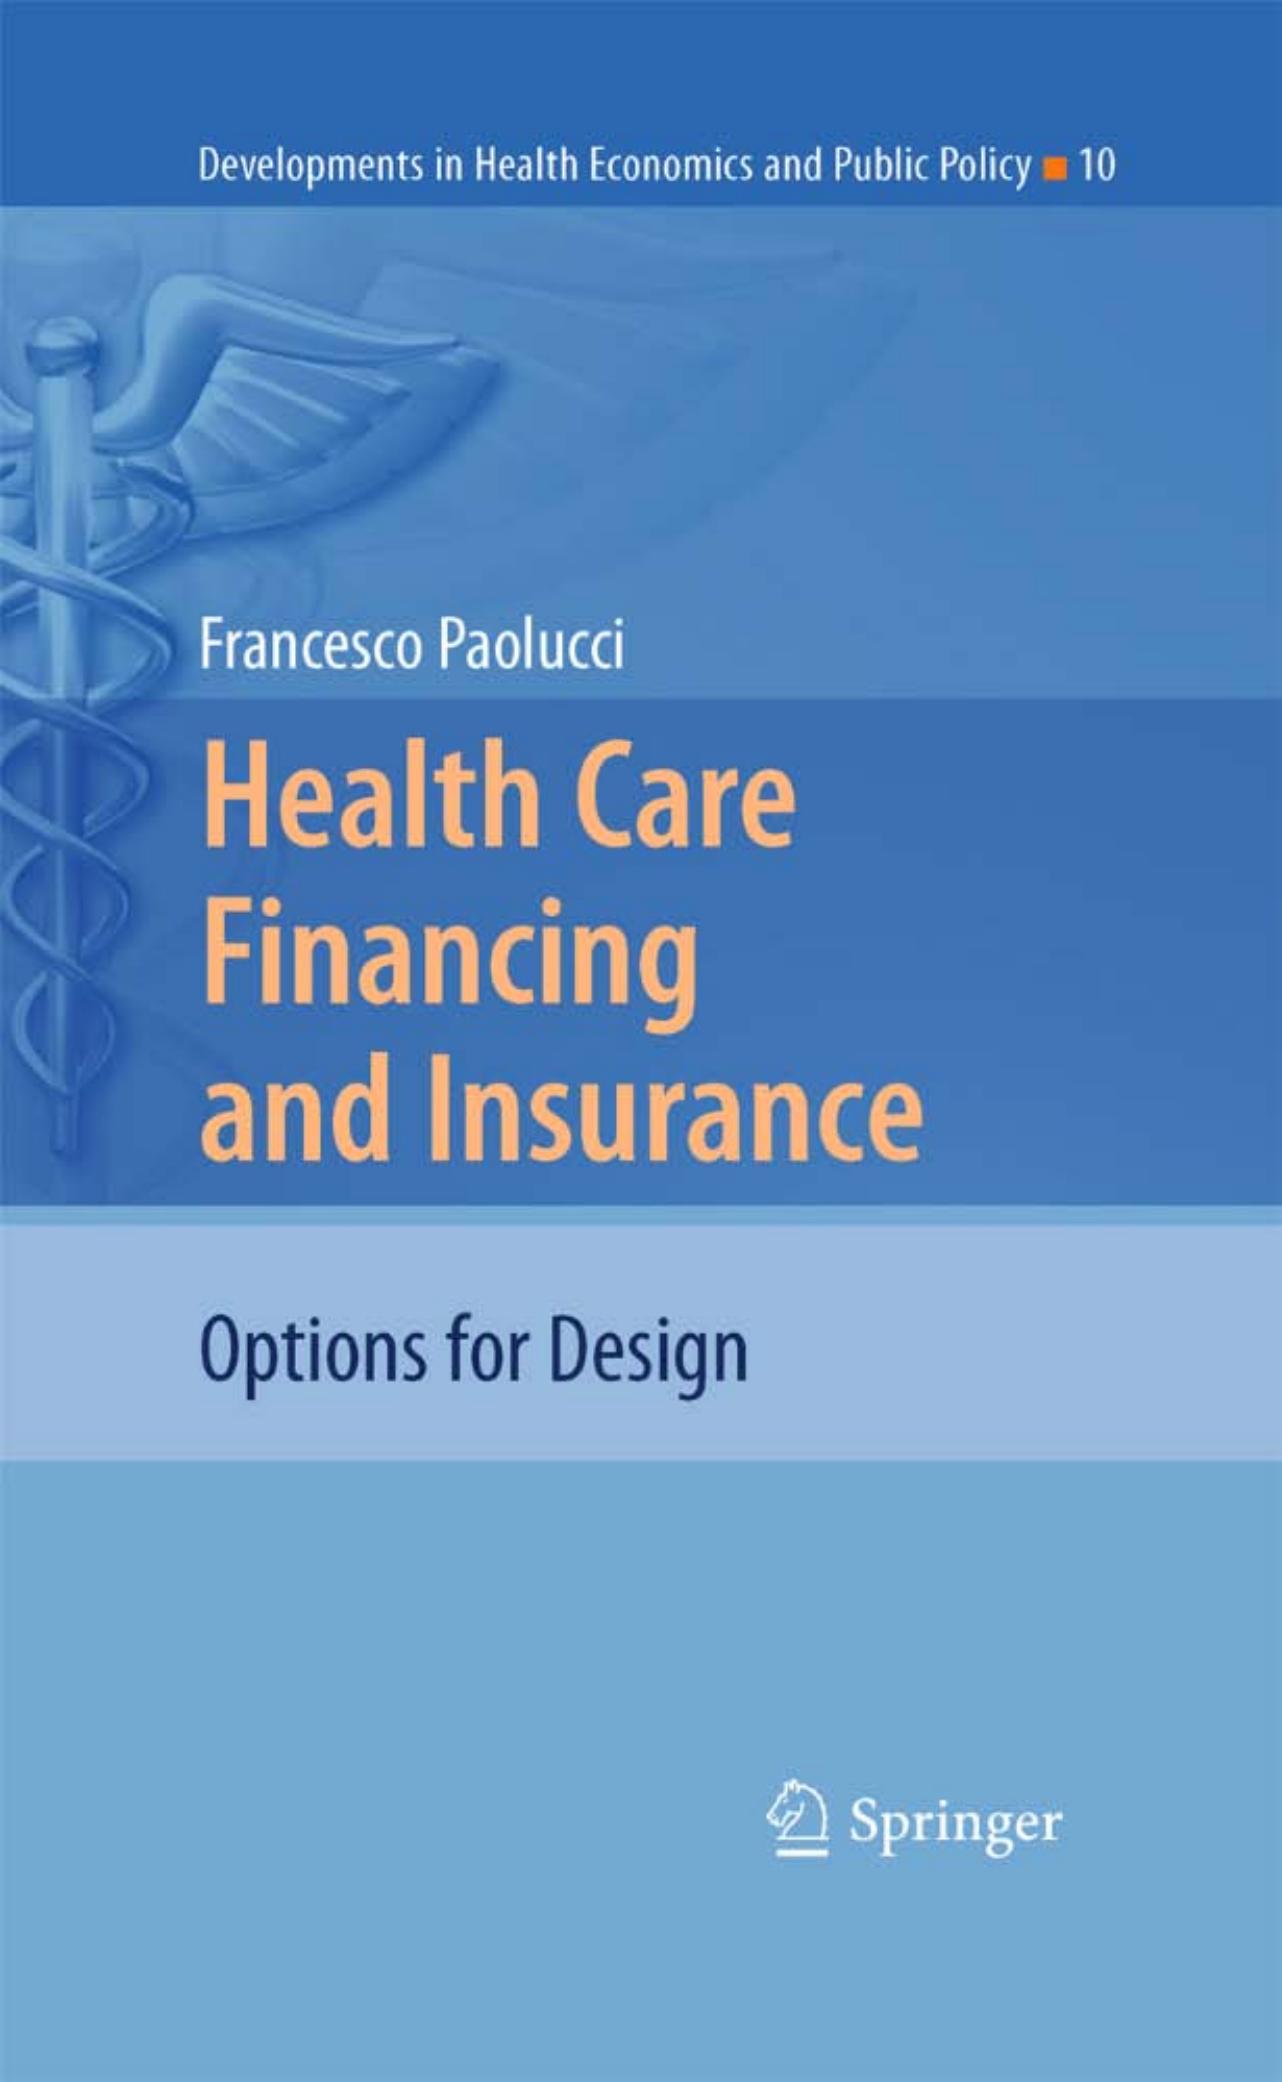 Health Care Financing and Insurance: Options for Design (Developments in Health Economics and Public Policy, 10)